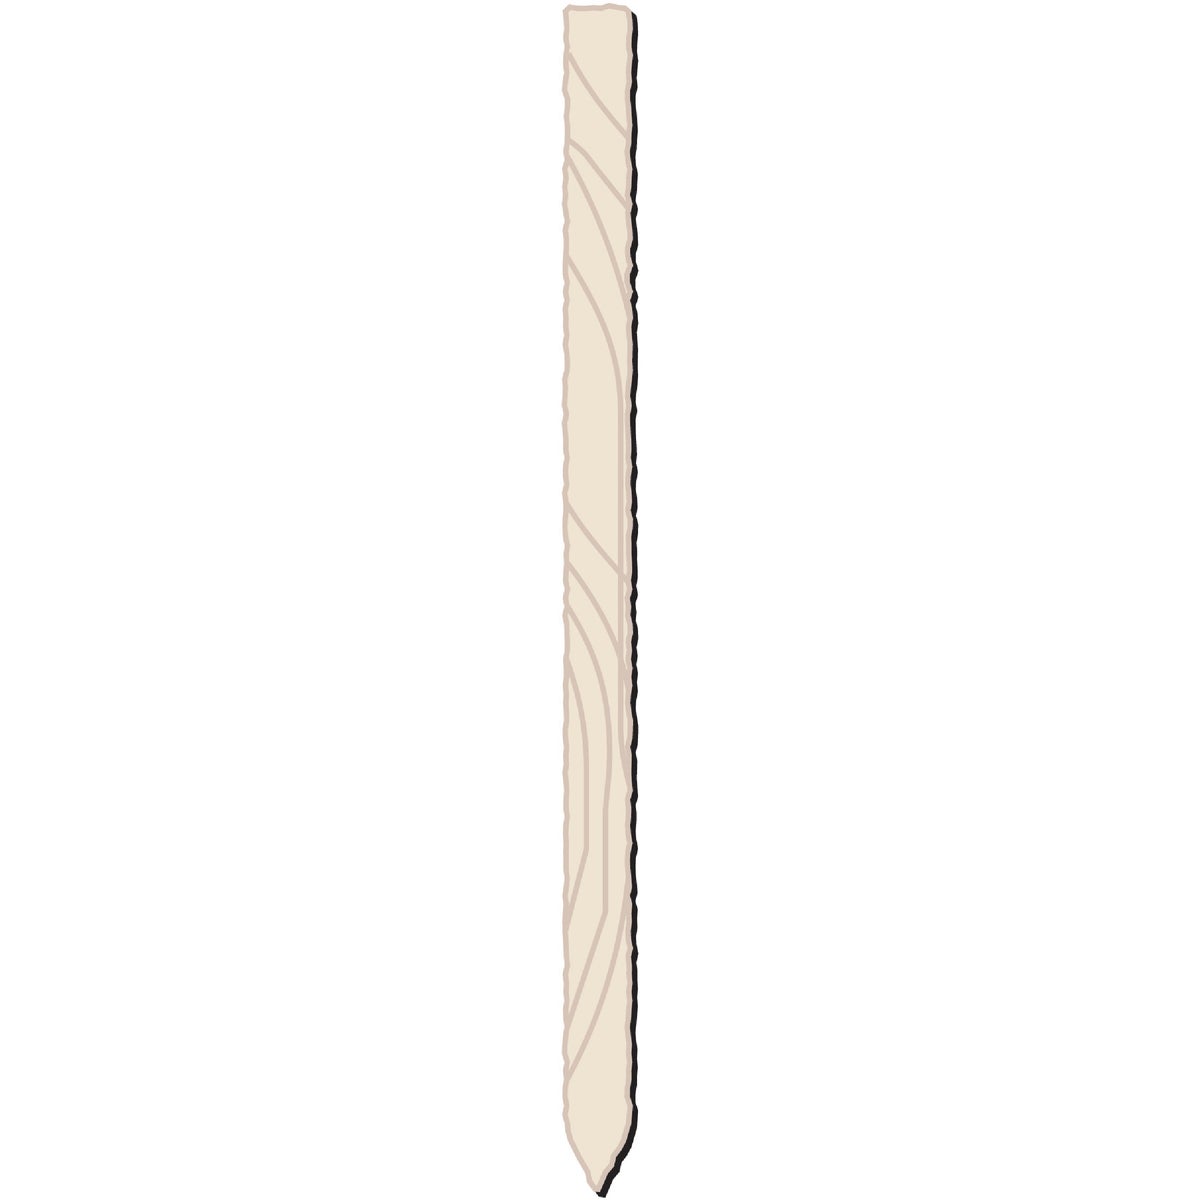 Hy-Ko 1 In. x 36 In. Wooden Sign Stake